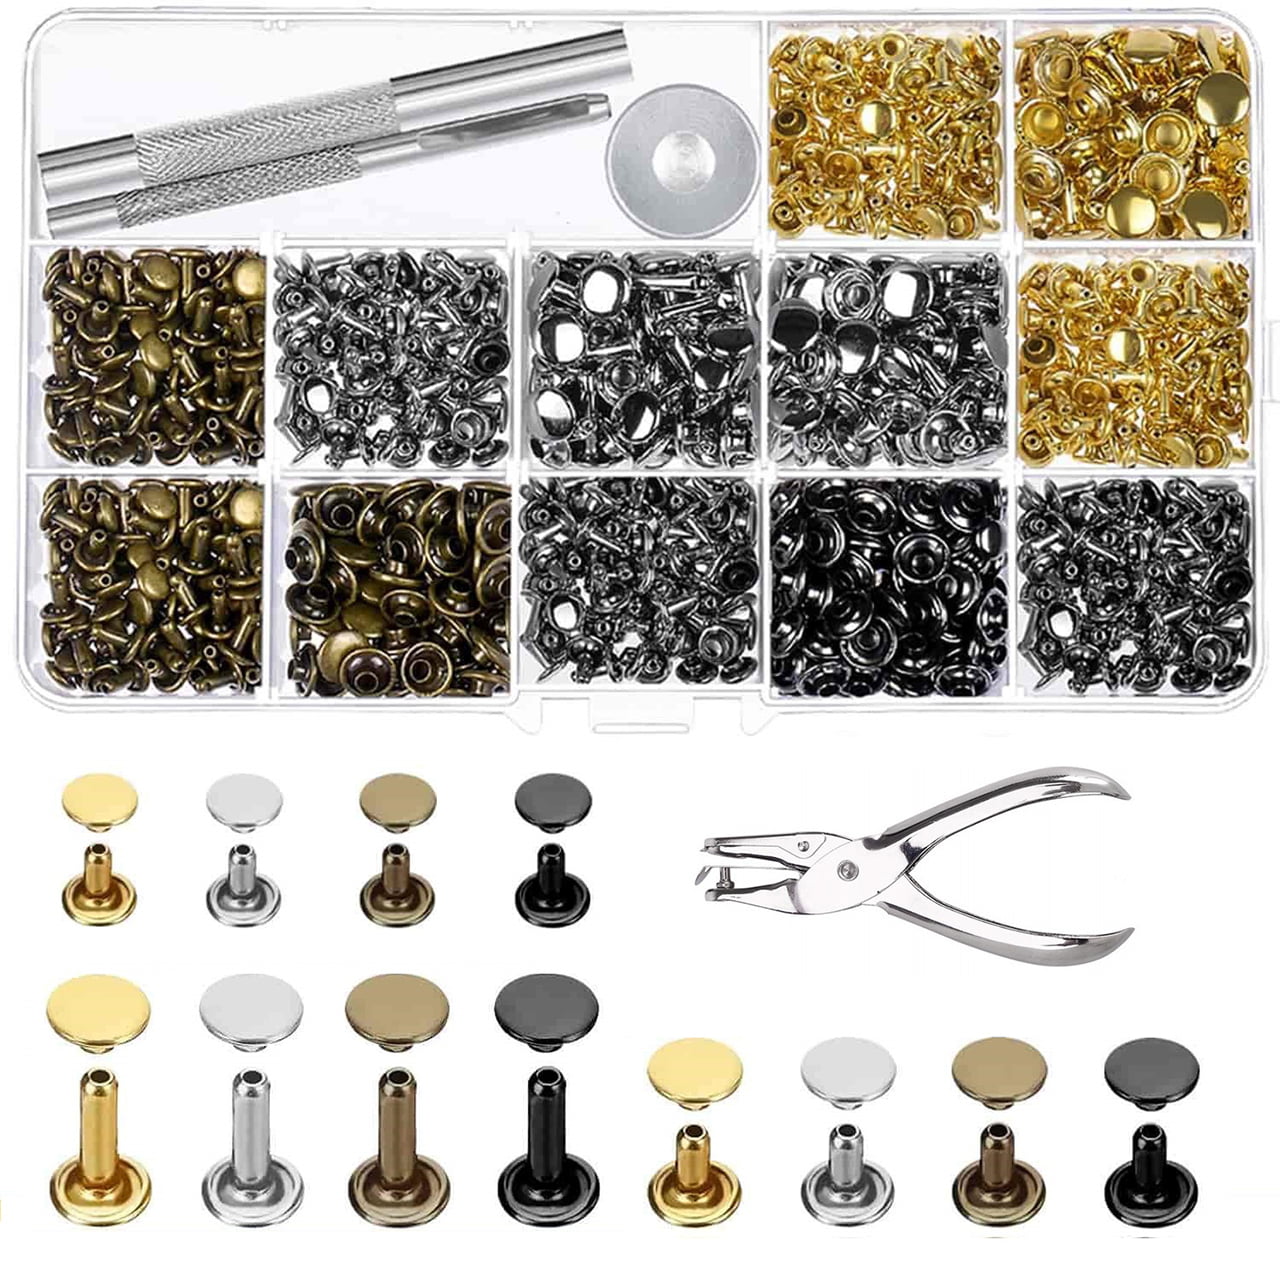 Leather Rivets Double Cap Rivet Tubular Metal Studs 2 Sizes with 3 Pieces Fixing Tools Chenkaiyang 240 Sets Snap Fasteners Kit 4 Color Clothing Snaps Kit